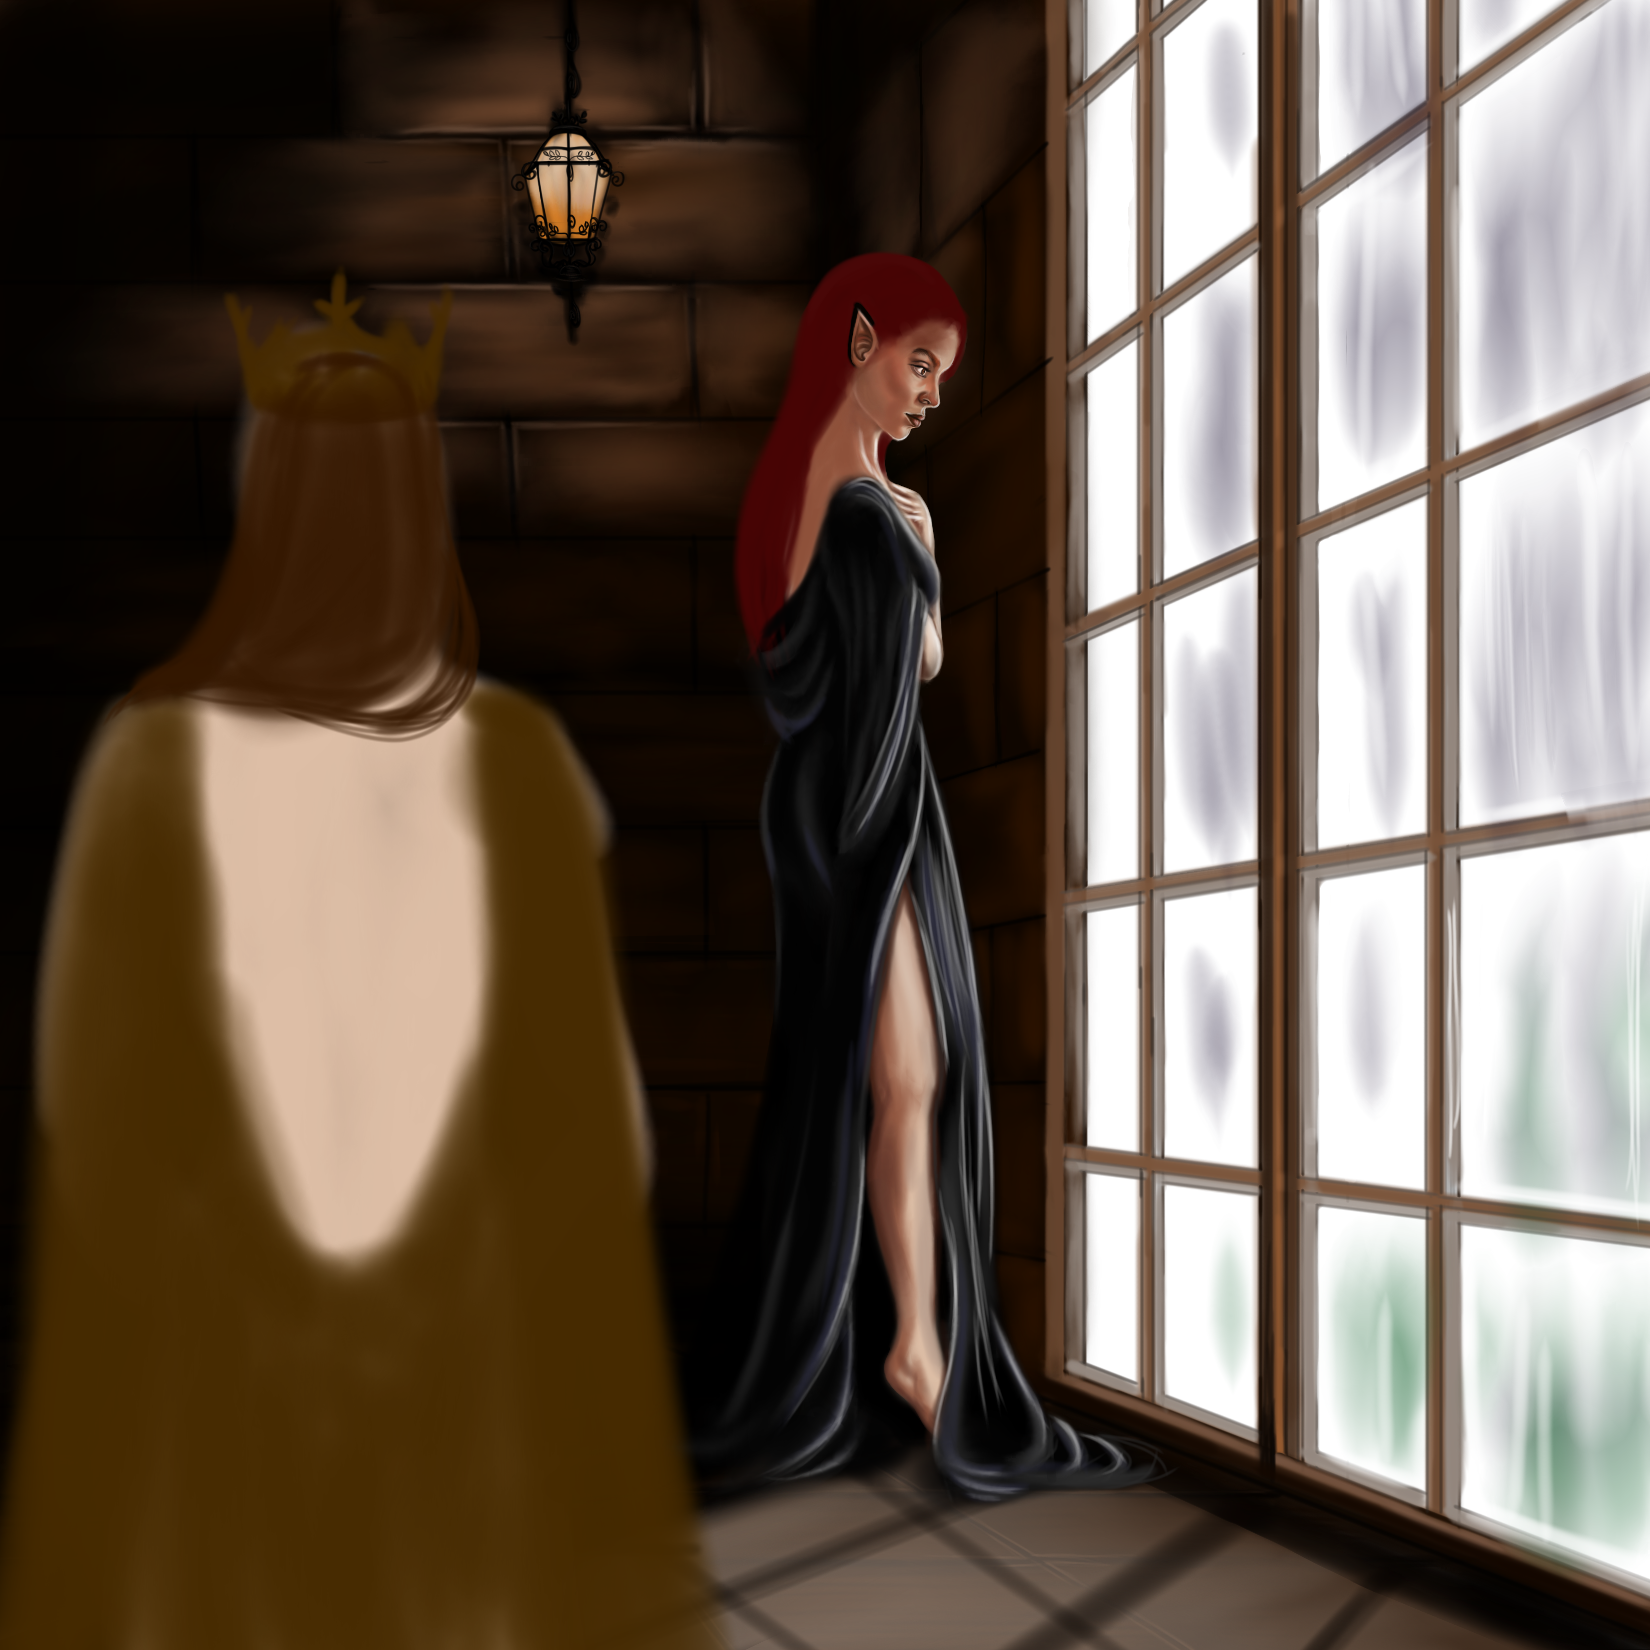 Francisftlp-Digital Drawing-The meeting with the Priestess-Step 4.png